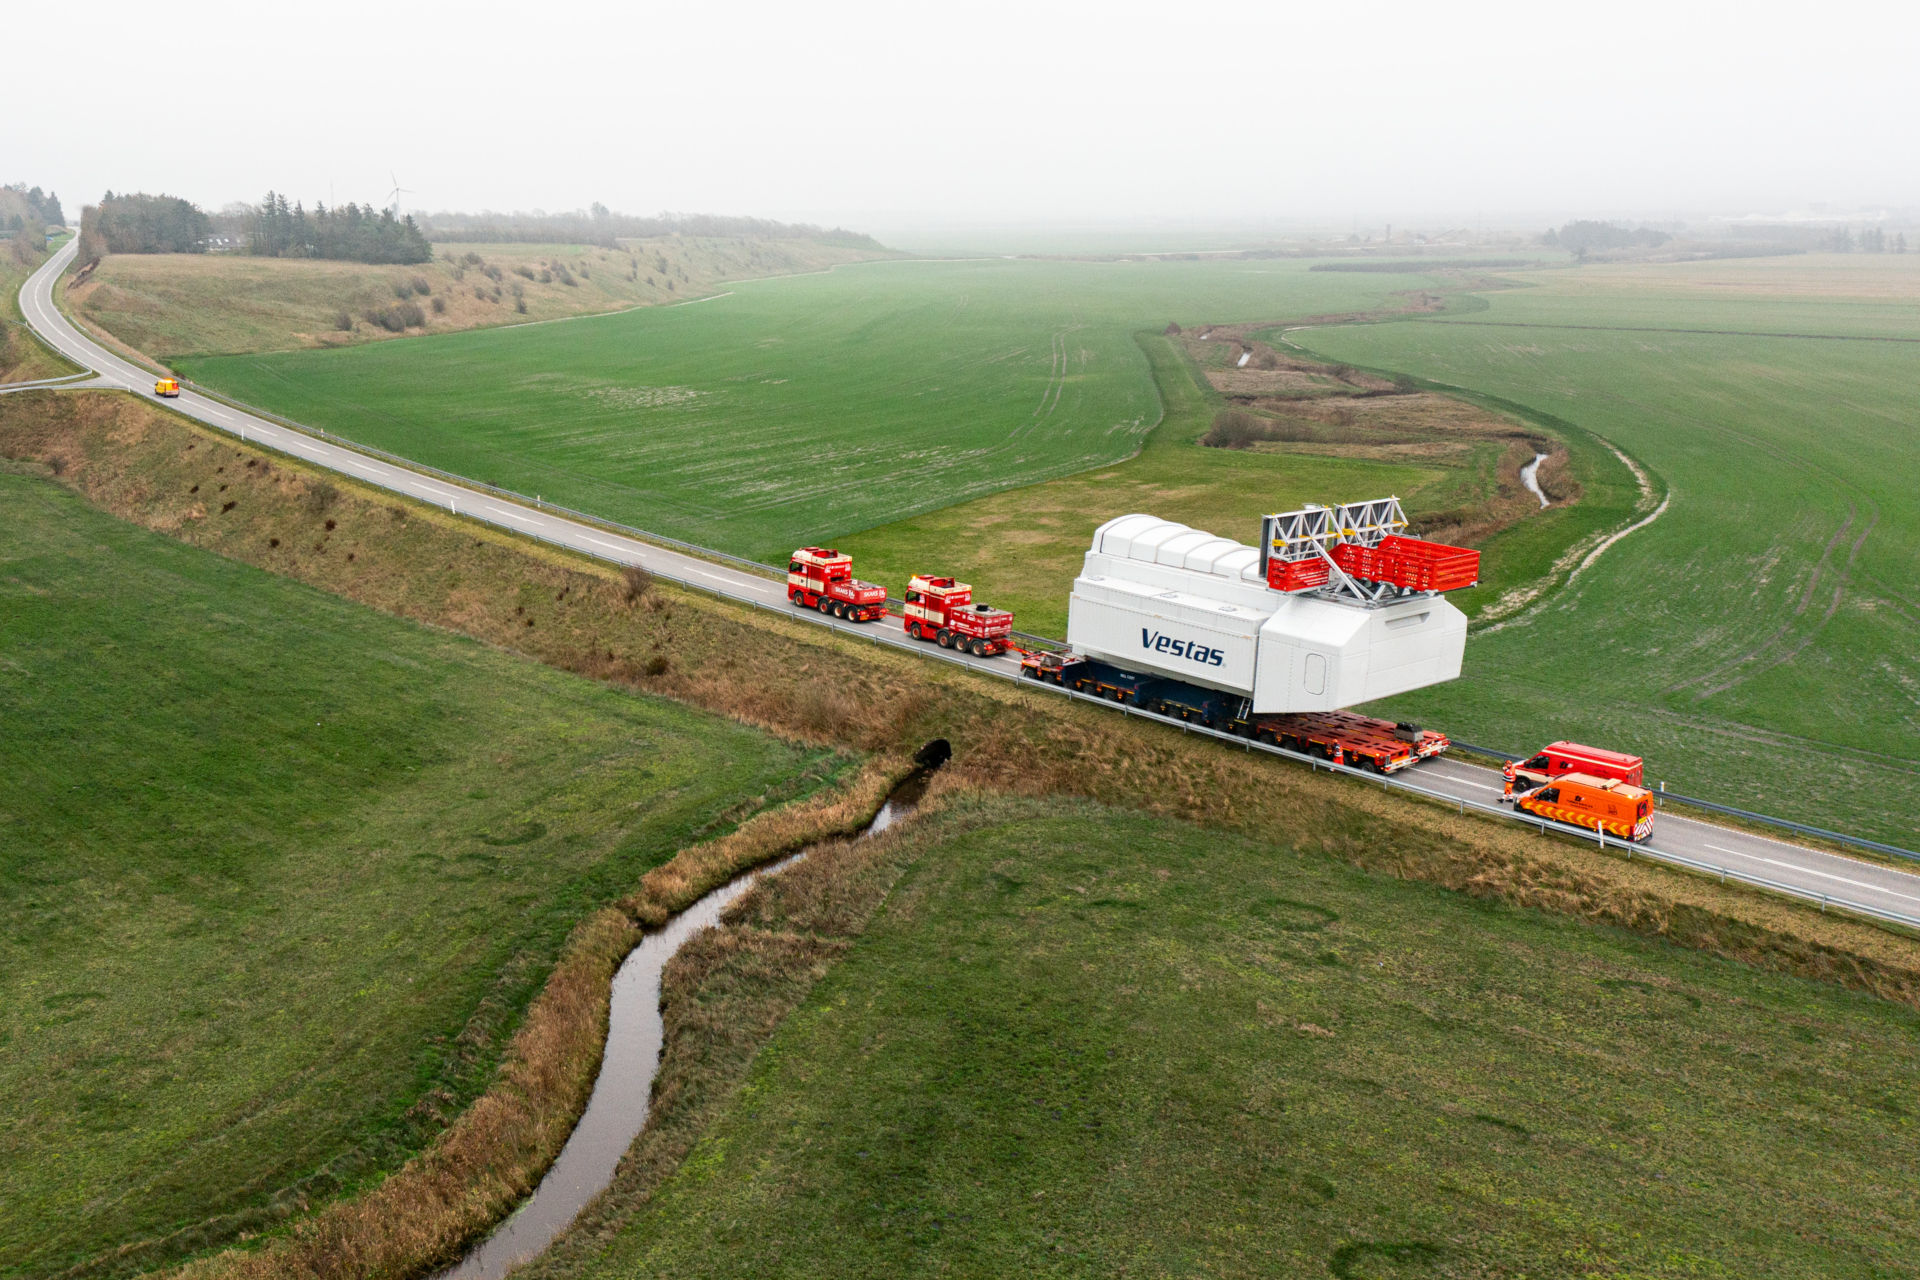 The nacelle for Vestas' 15MW turbine prototype en route to the Danish national test center in Osterild (FOTO: Vestas) - Rapidly introducing new, larger turbines hinders offshore wind’s sustainability